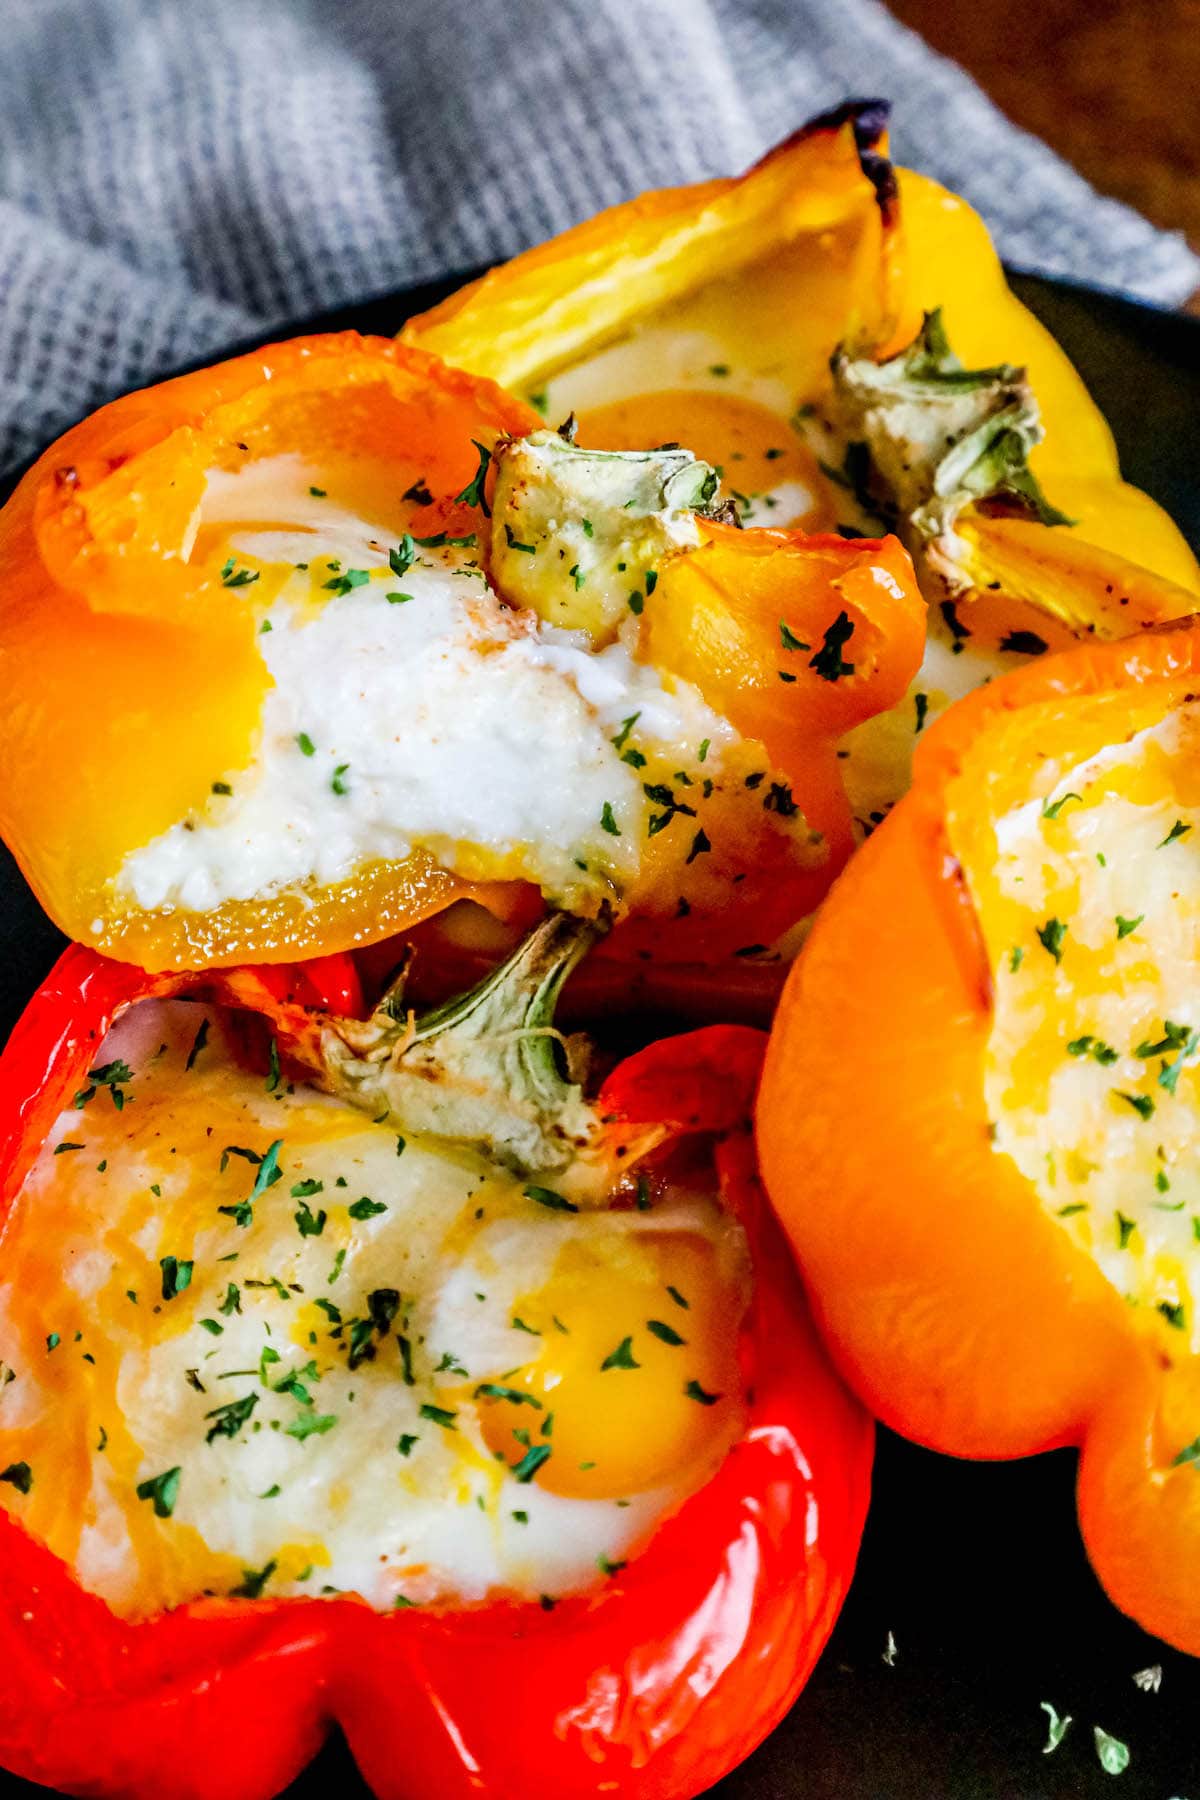 baked eggs inside half of a yellow bell pepper with melted cheese and herbs on top on a black plate